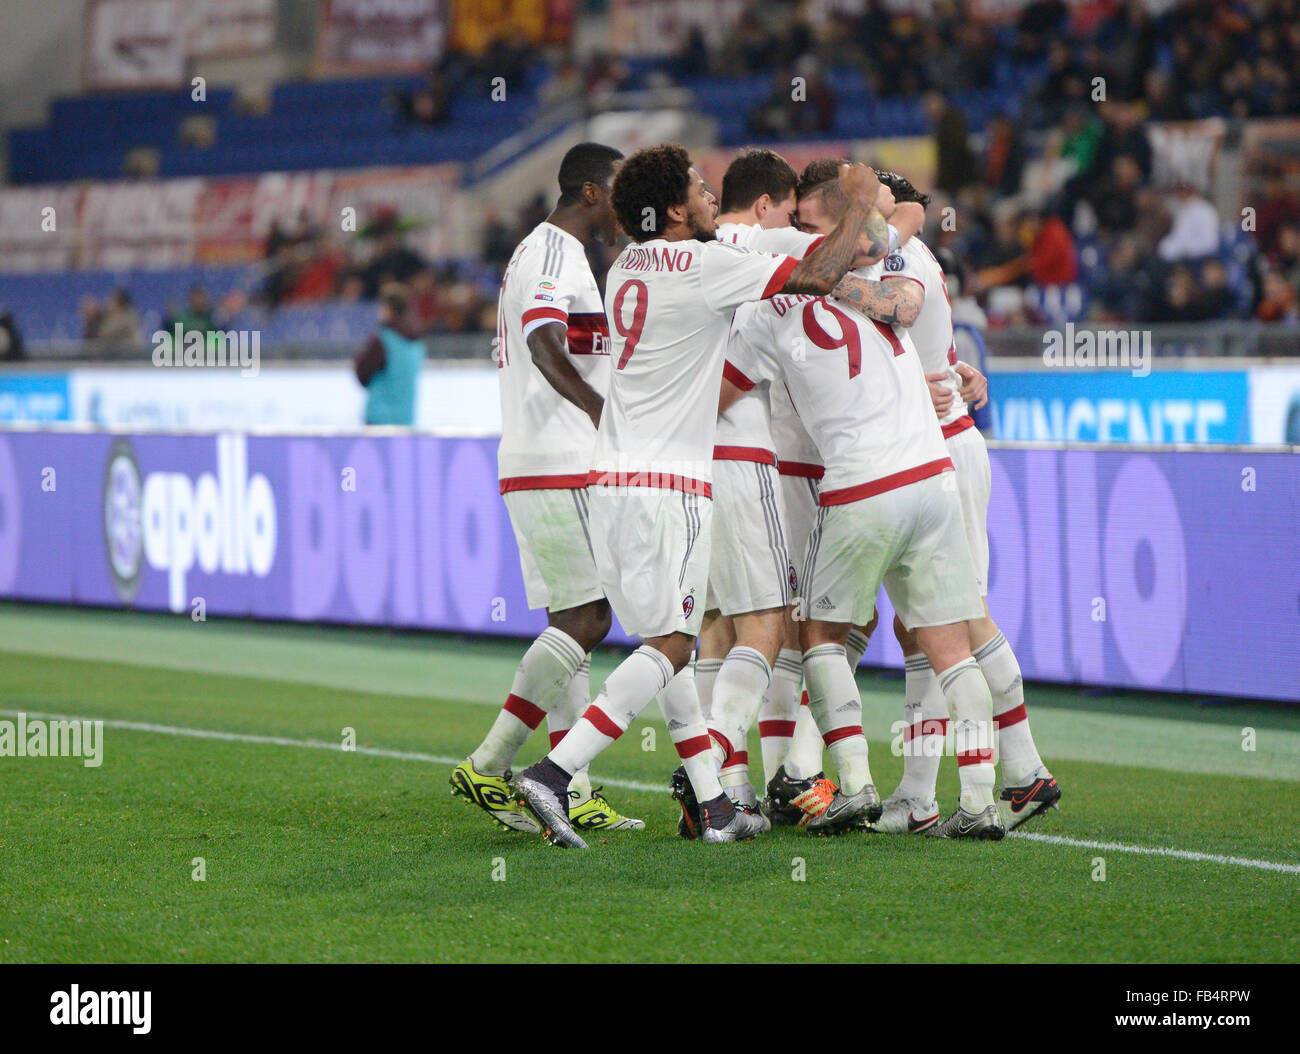 Rome, Italy. 09th Jan, 2016. Juray Kucka celebrates after score a goal  during the Italian Serie A football match A.S. Roma vs A.C. Milan at the Olympic Stadium in Rome, on january 09, 2016 Credit:  Silvia Lore'/Alamy Live News Stock Photo